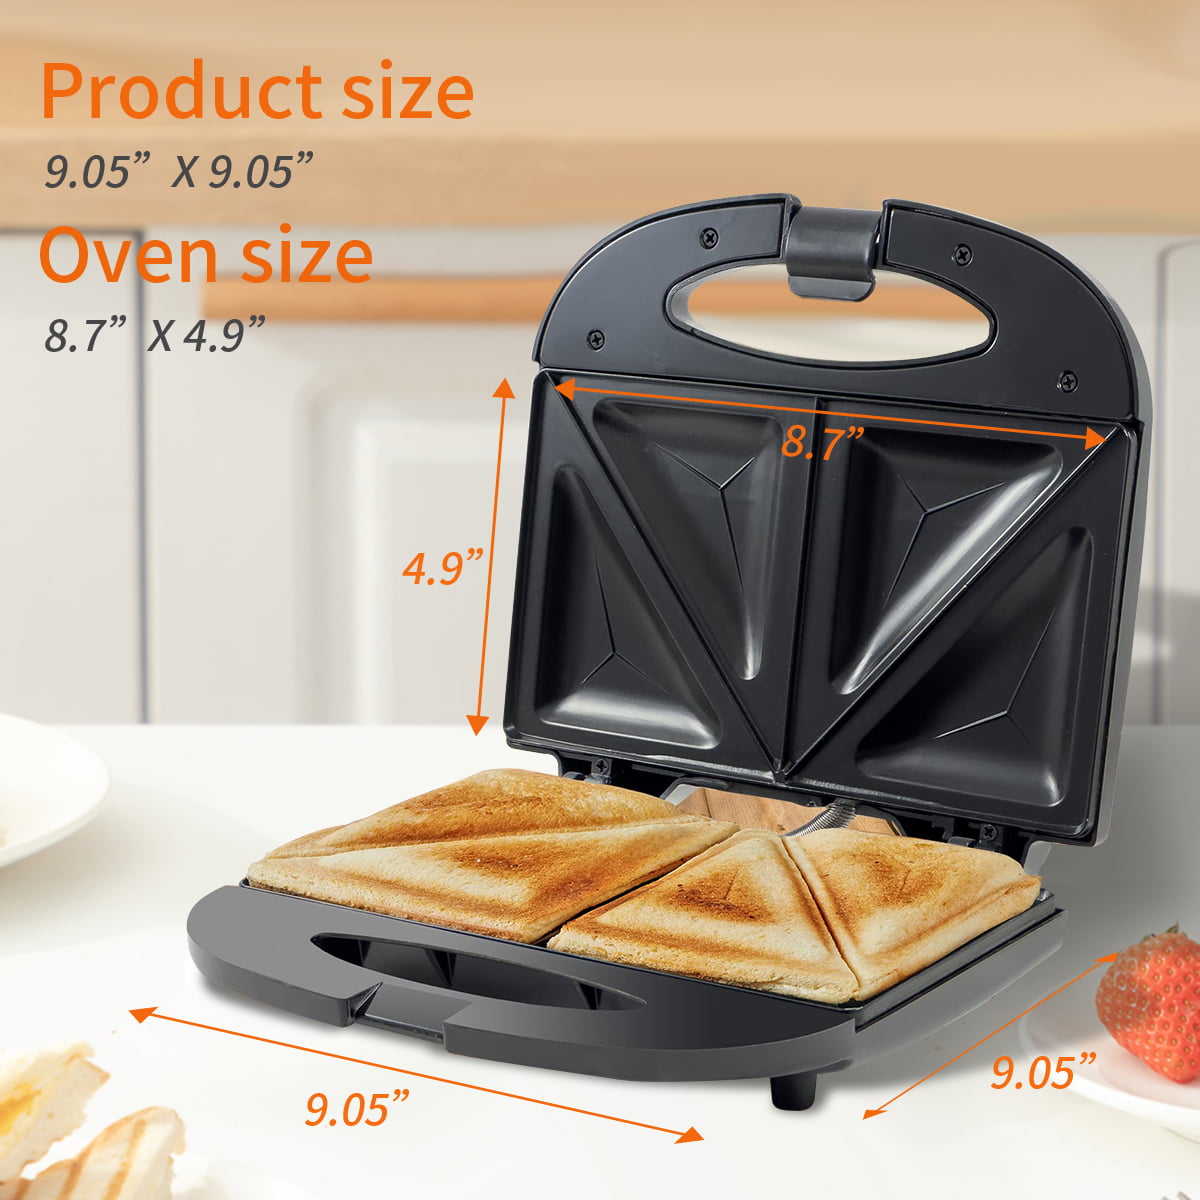 Swan Toasty- A Toasted Sandwich Maker with them Microwave square